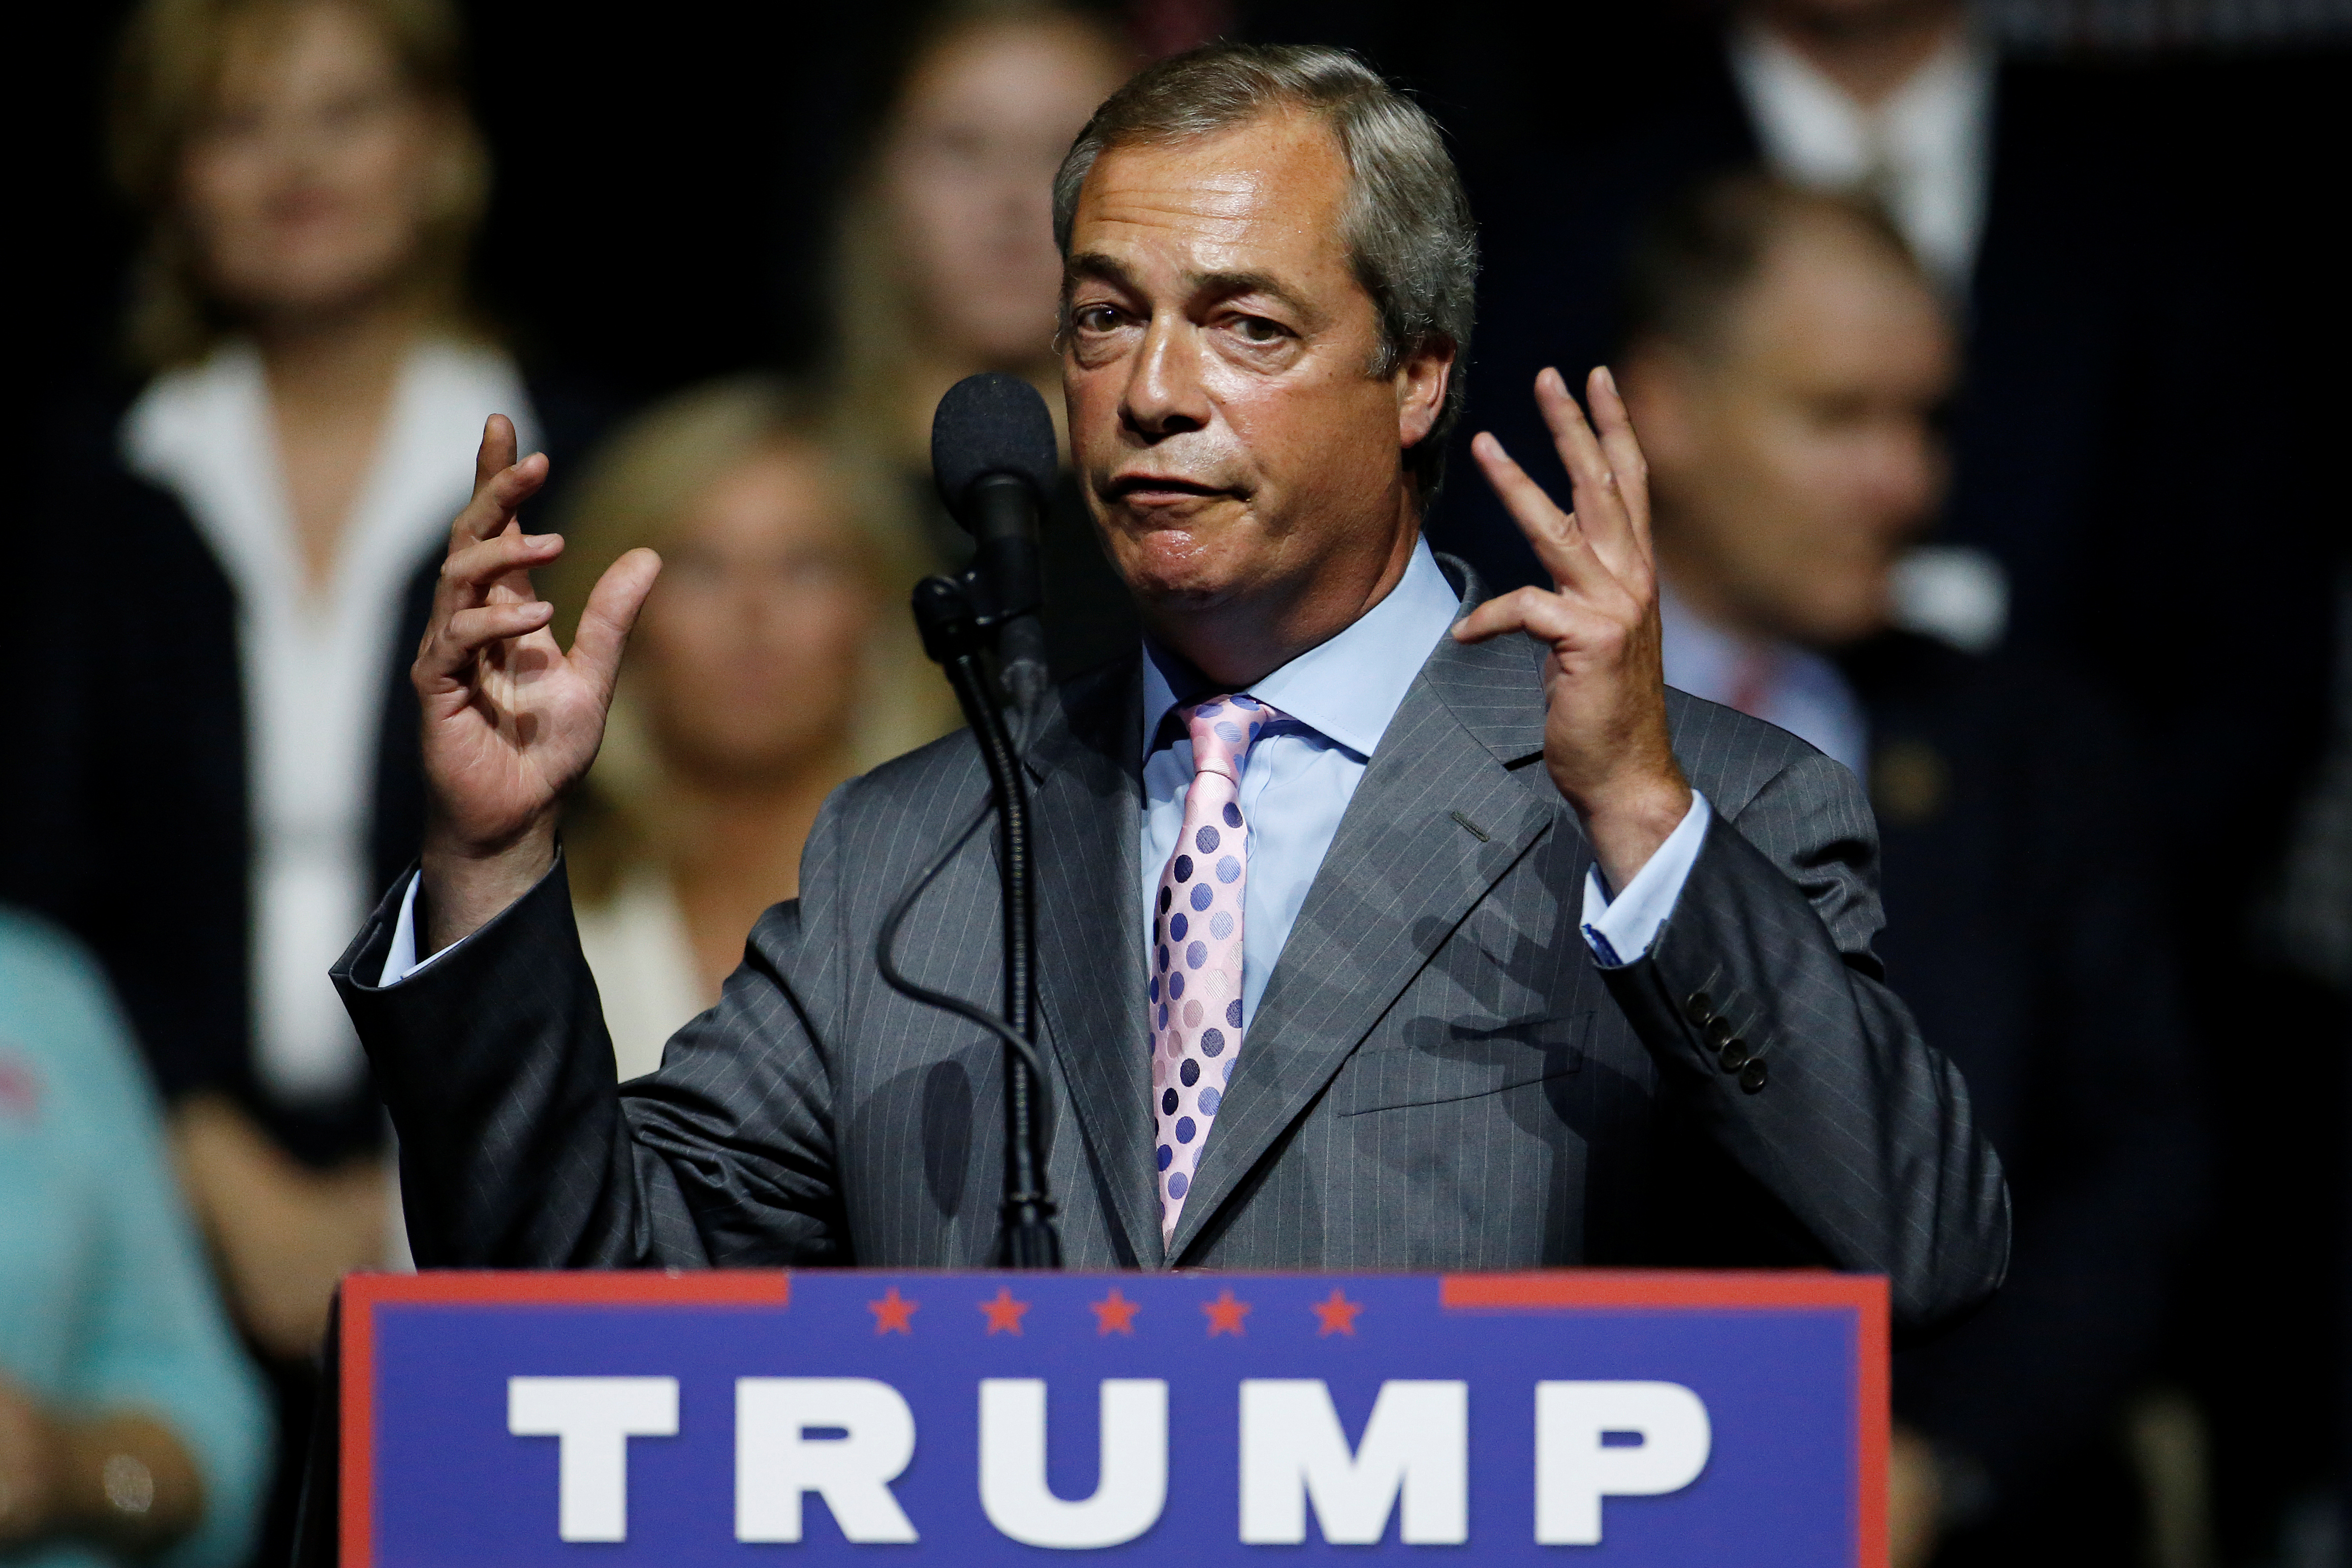 Outgoing UKIP leader Nigel Farage speaks during a campaign rally of Republican presidential nominee Donald Trump in Jackson, Miss., on Aug. 24, 2016 (Carlo Allegri—Reuters)